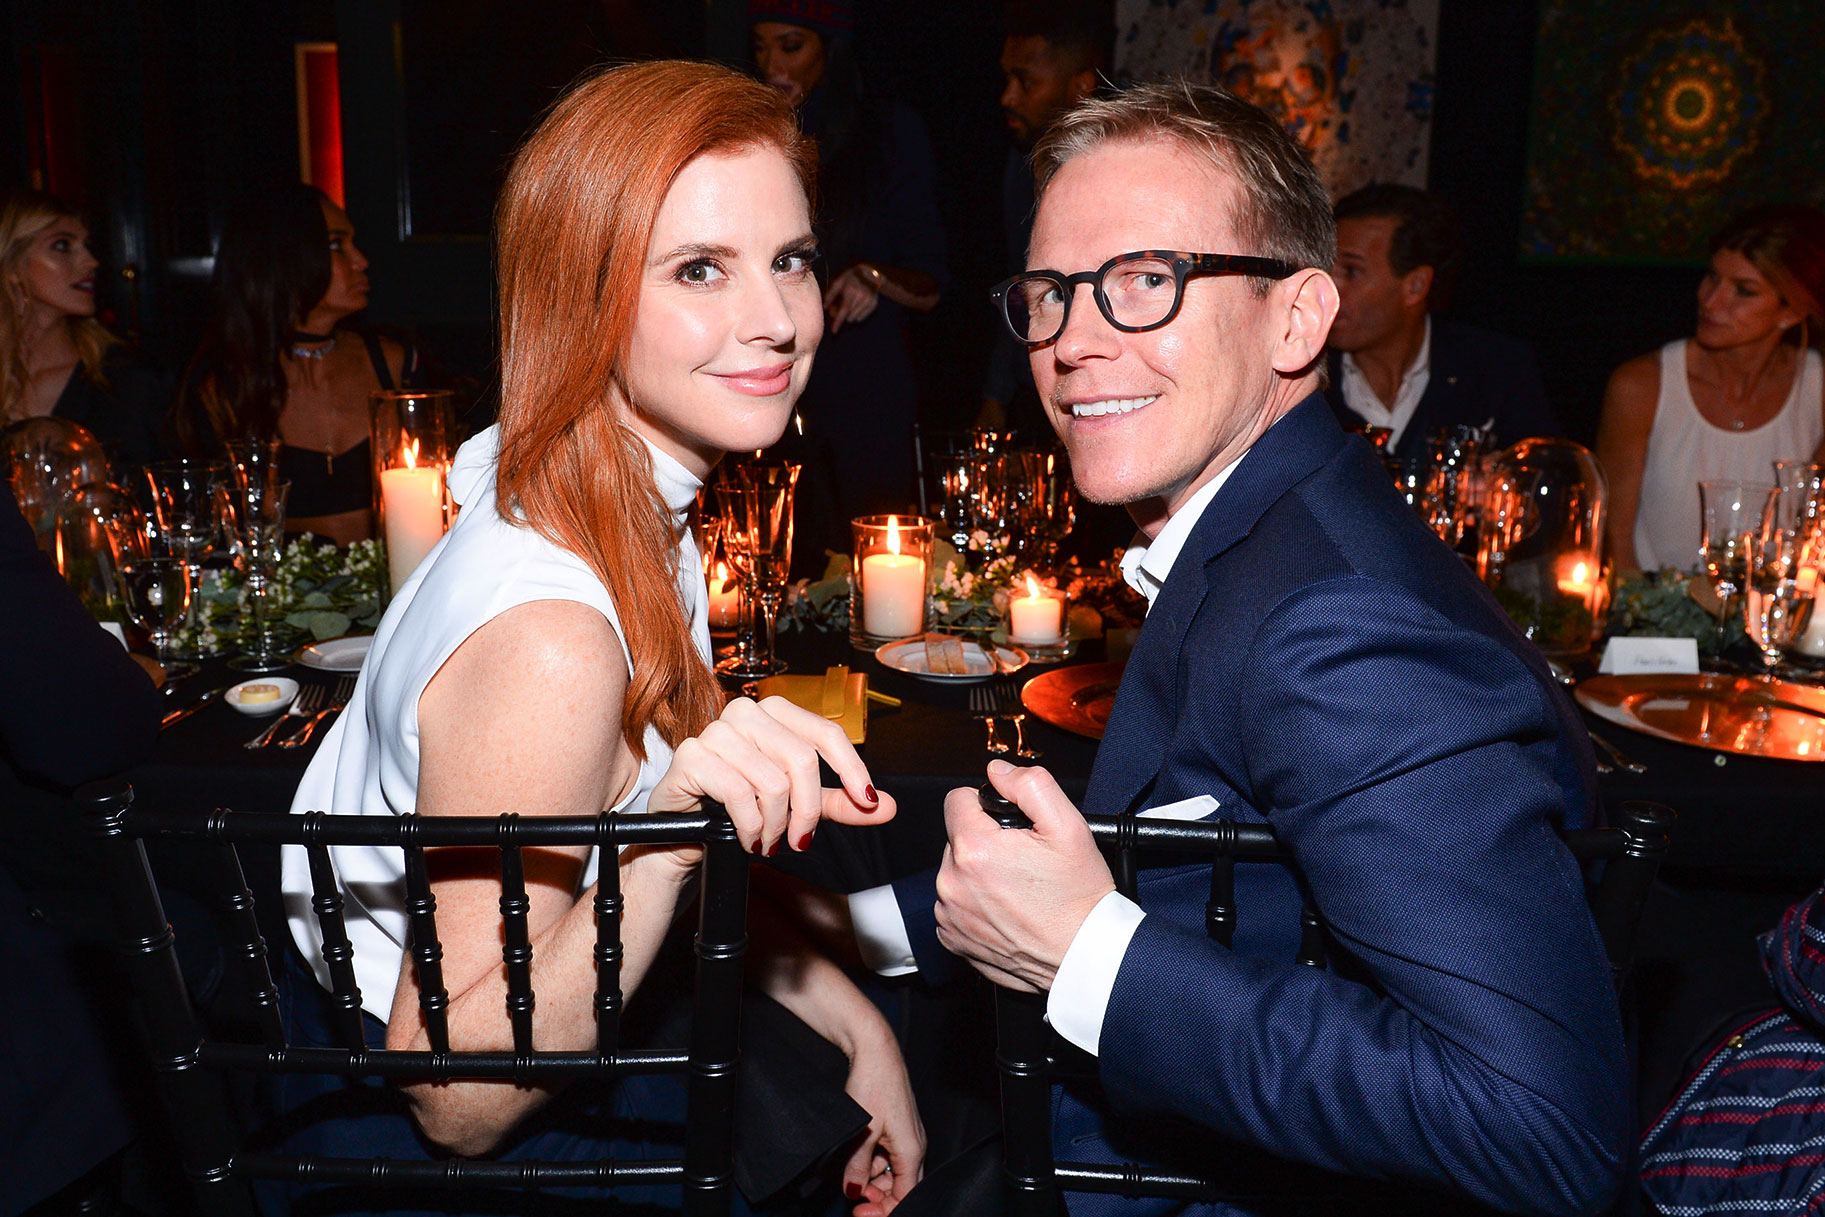 Sarah Rafferty and her Husband smile for a photo while seated at a dinner table